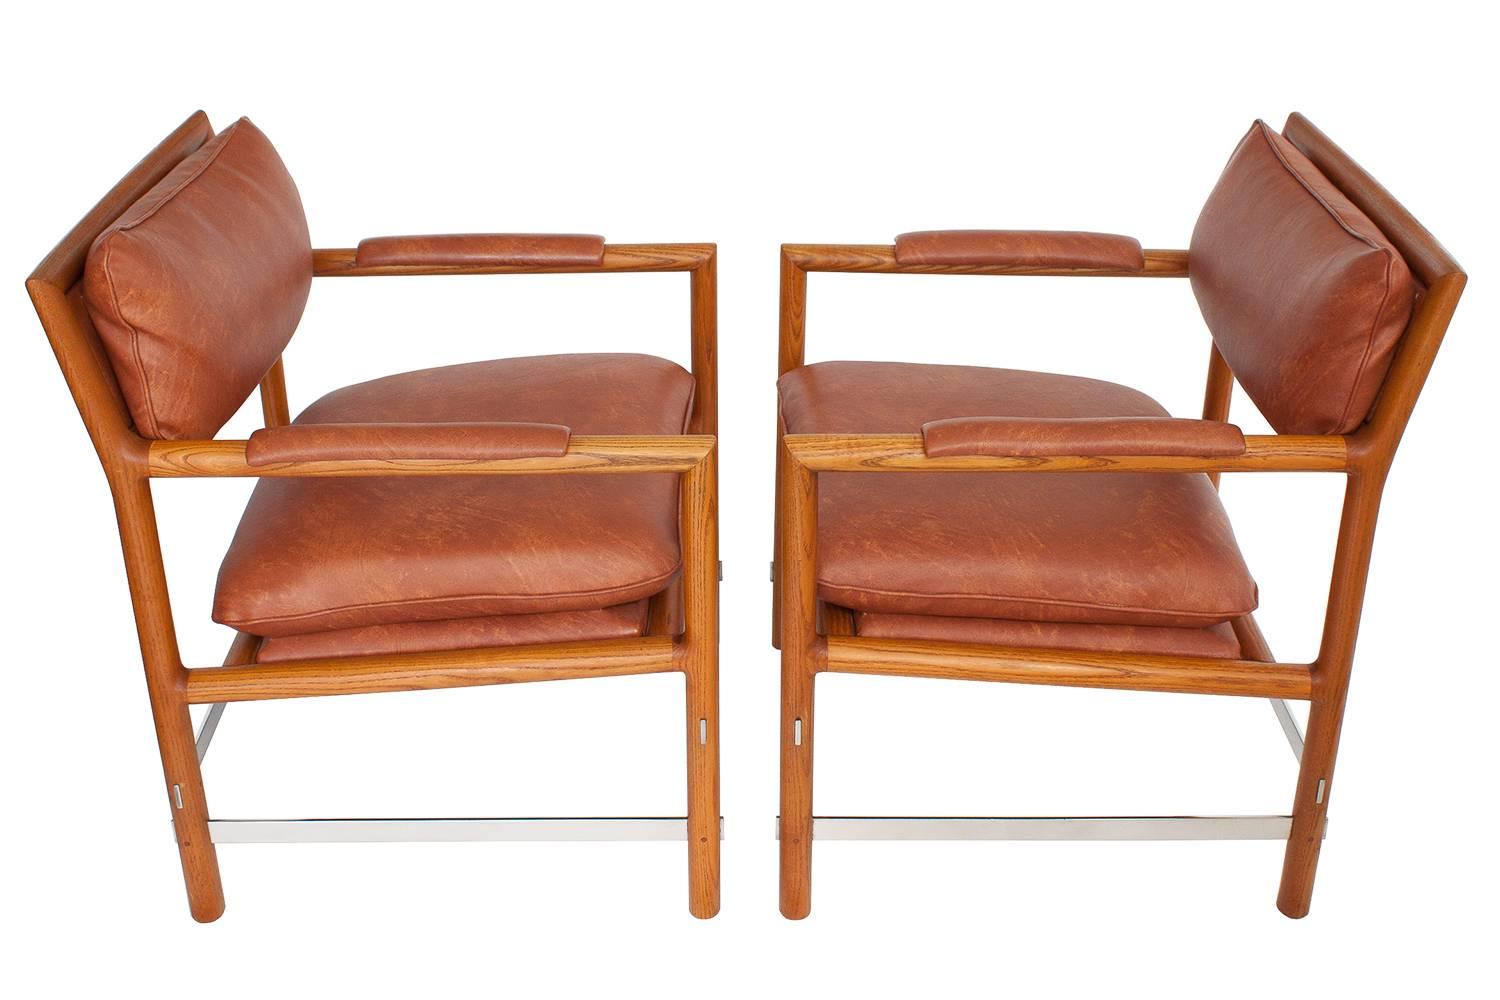 Pair of Dunbar armchairs, circa 1960s by Edward Wormley (1907-1995.) Known as 